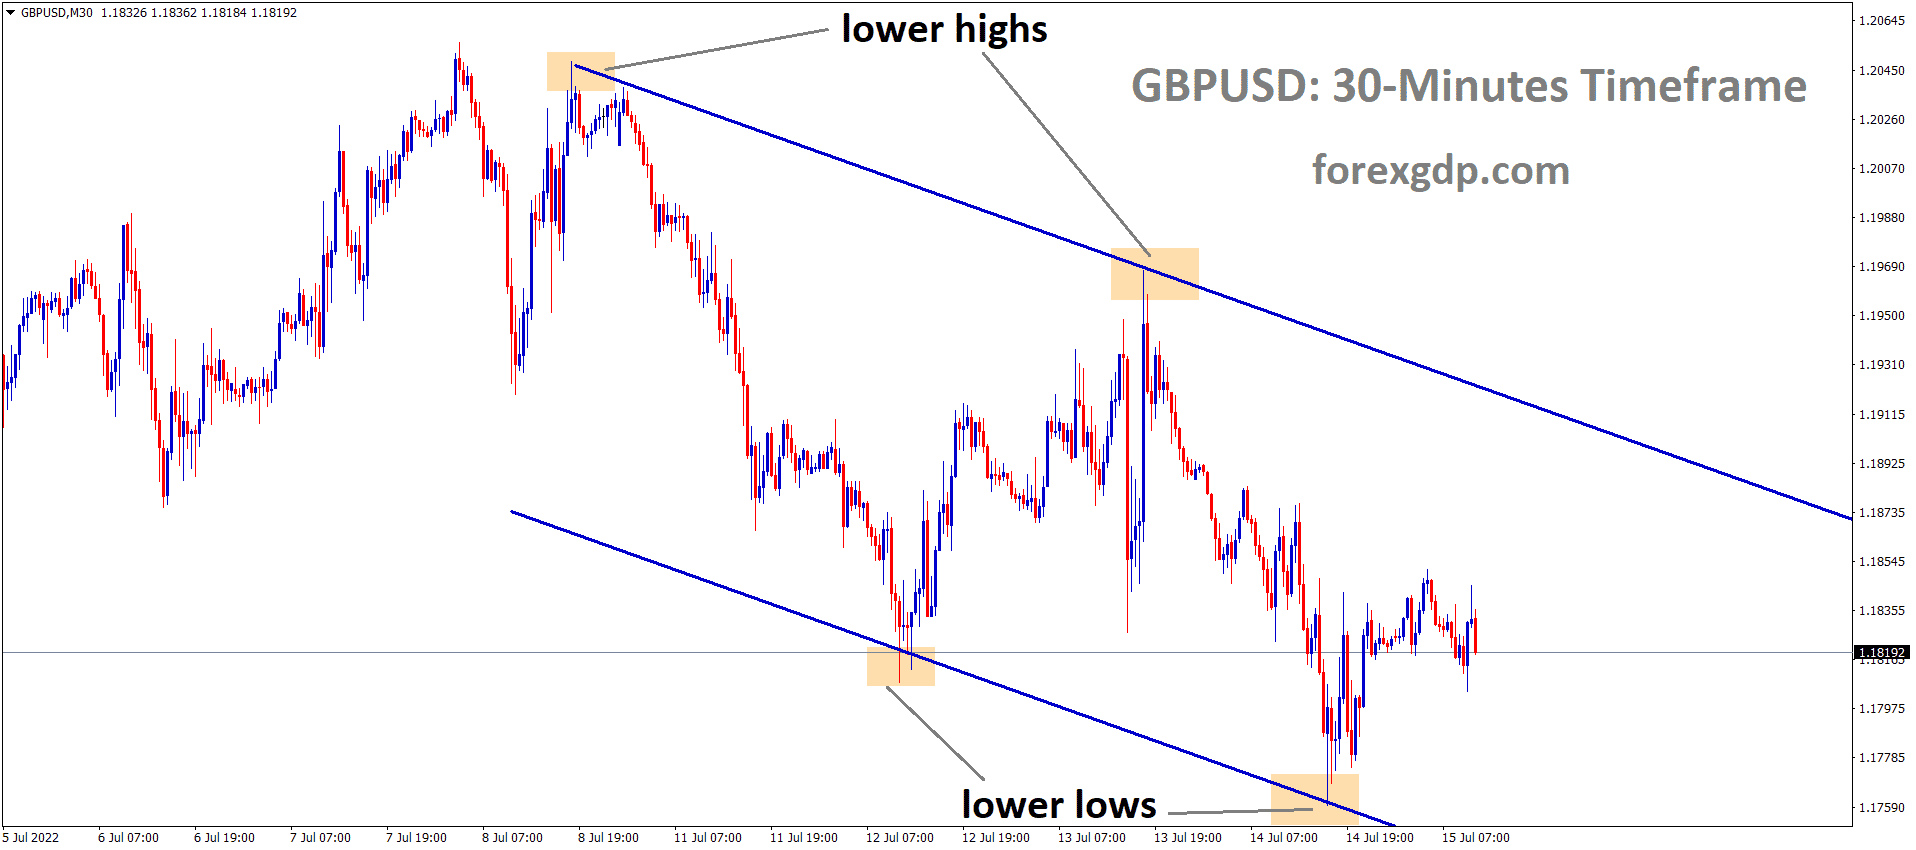 GBPUSD M30 TF analysis Market is moving in the Descending channel and the market has rebounded from the lower low area of the channel